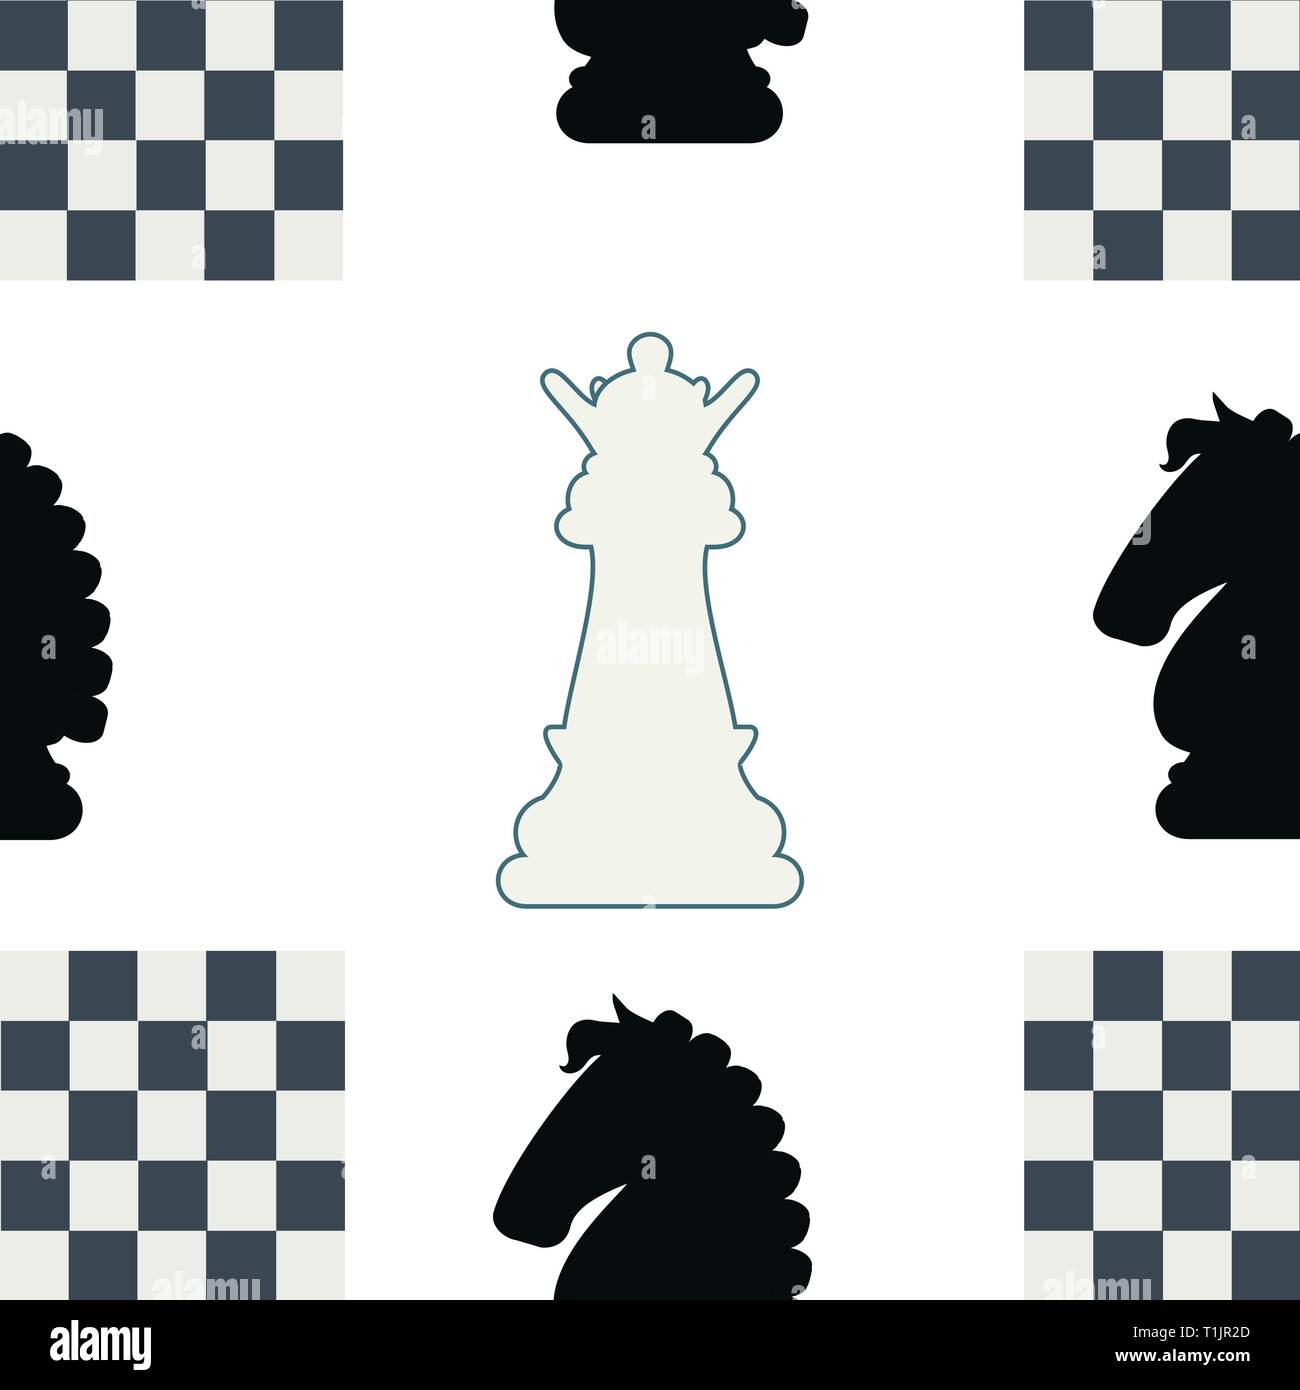 Seamless Chessboard Pattern. Contrast and Bright Mosaic Decoration for  Design, Art, Prints, Wallpaper, Backdrops Stock Illustration - Illustration  of chess, ornament: 166098017